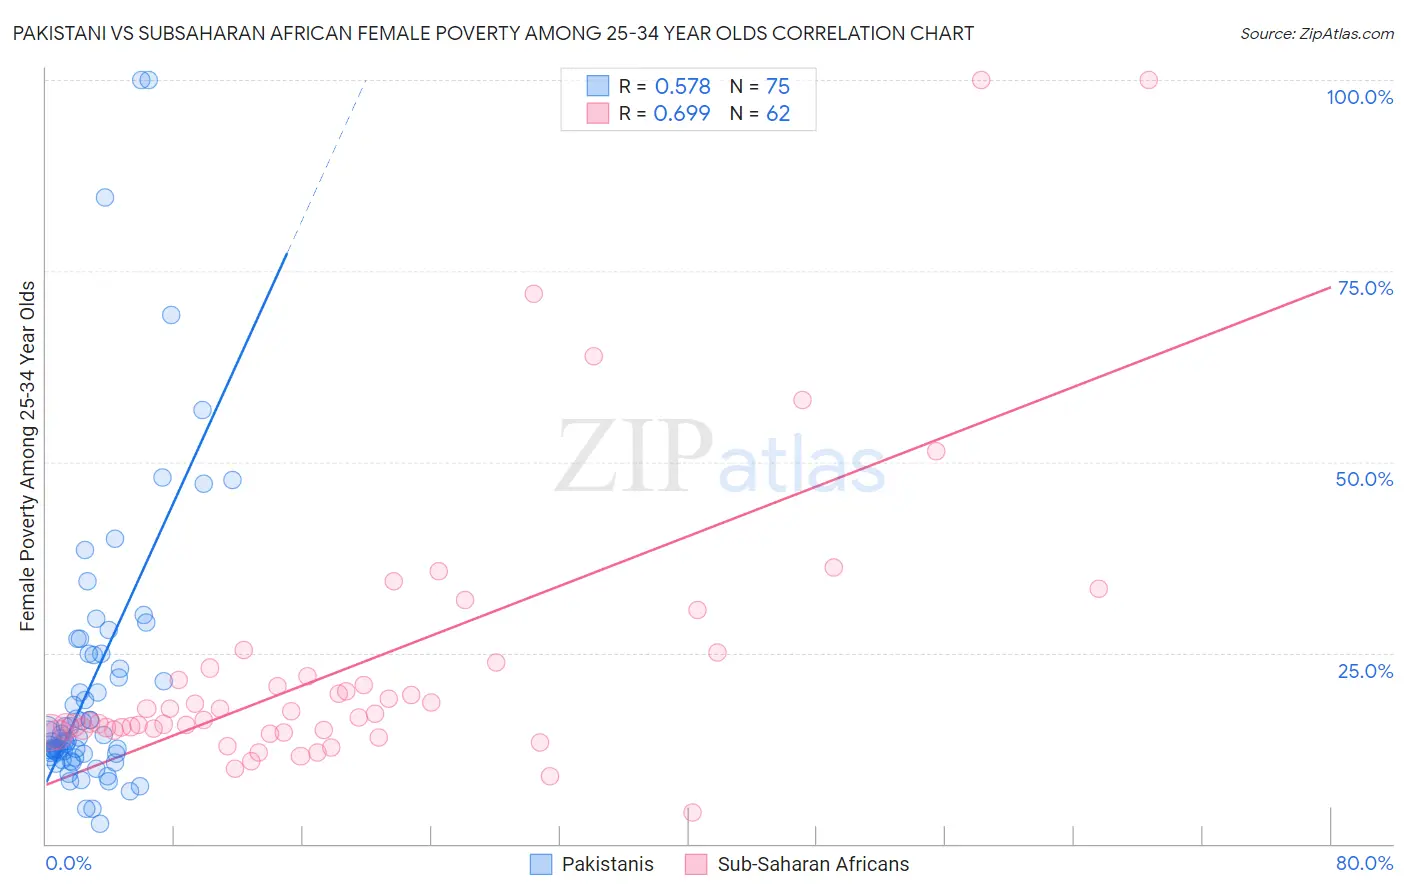 Pakistani vs Subsaharan African Female Poverty Among 25-34 Year Olds